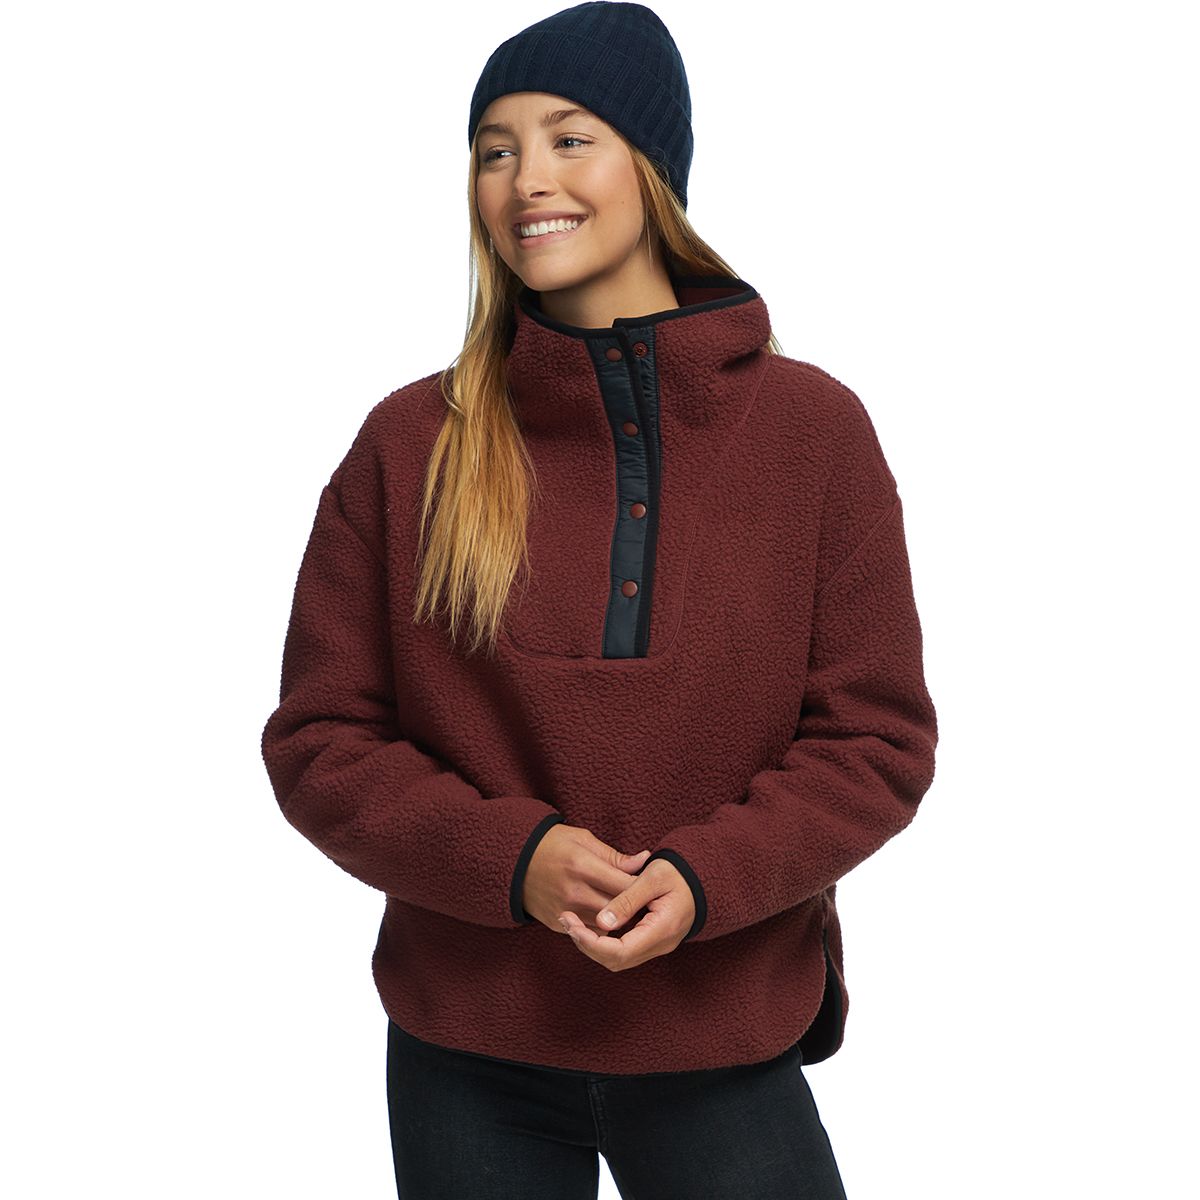 Scenic Oregon 7 Day Road Trip Exploring the Mountains and Coast- Womens Fleece